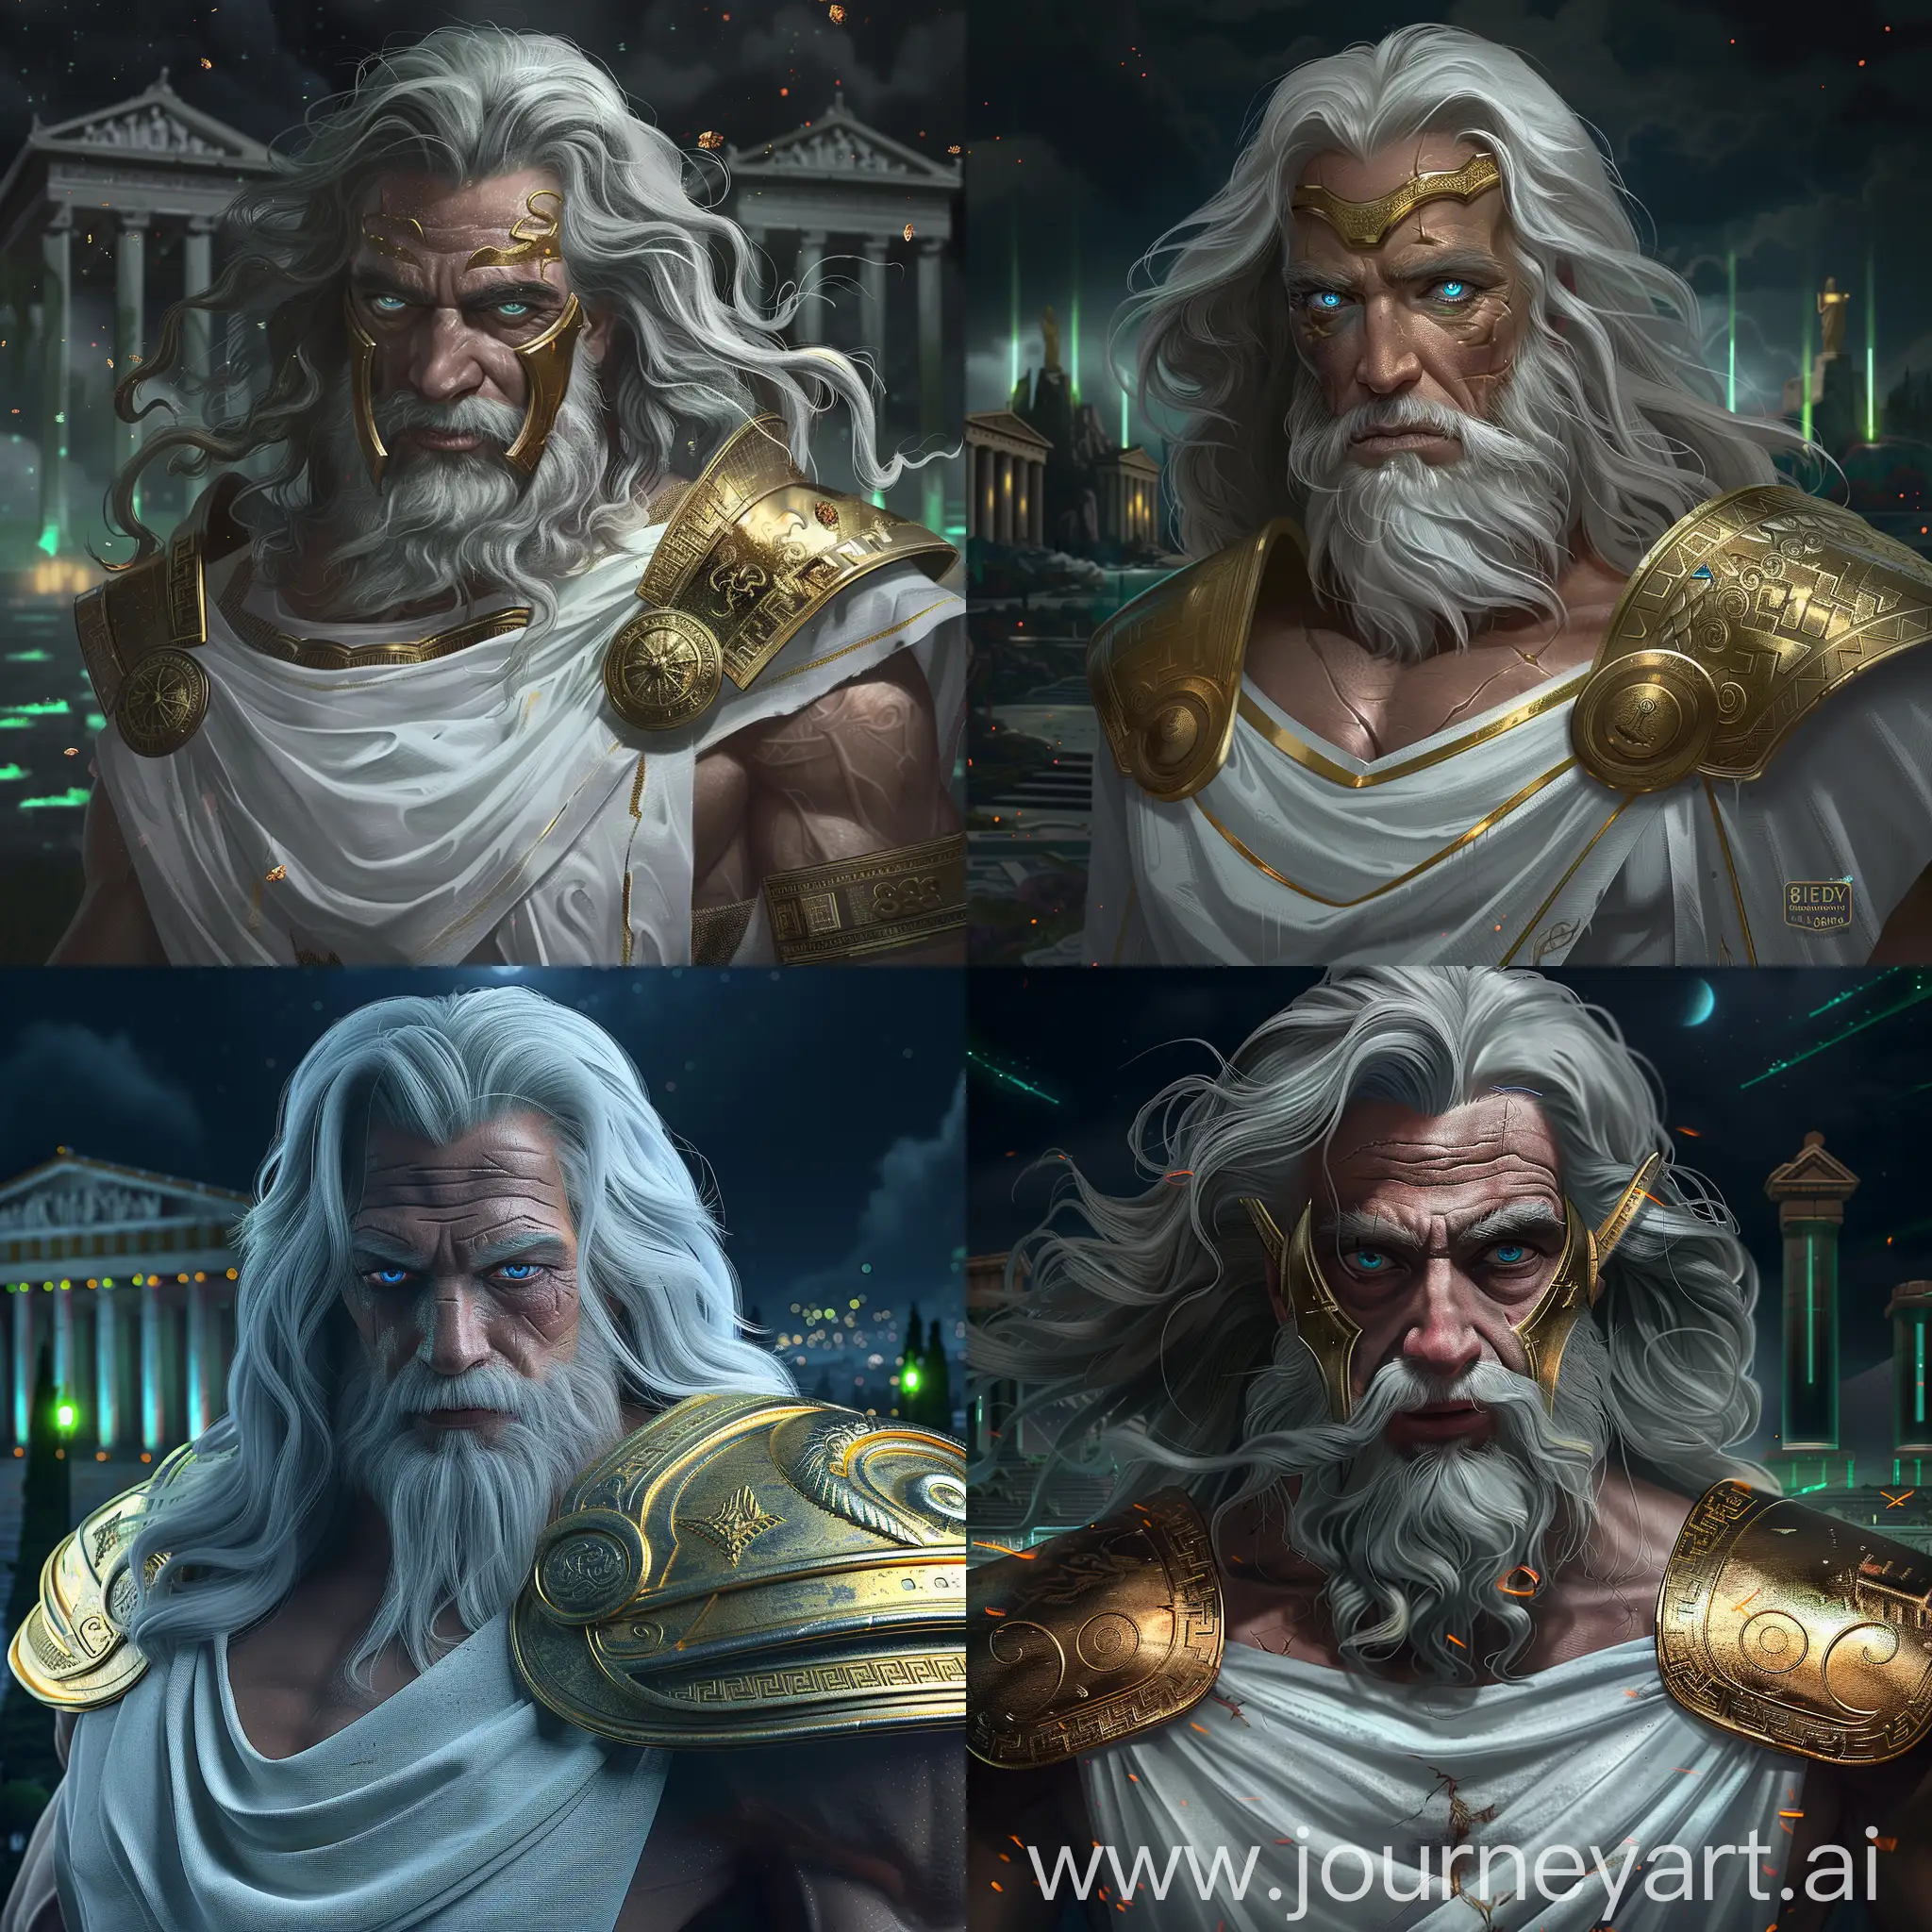 Zeus-Greek-God-in-Golden-Armor-Amidst-Night-and-Temples